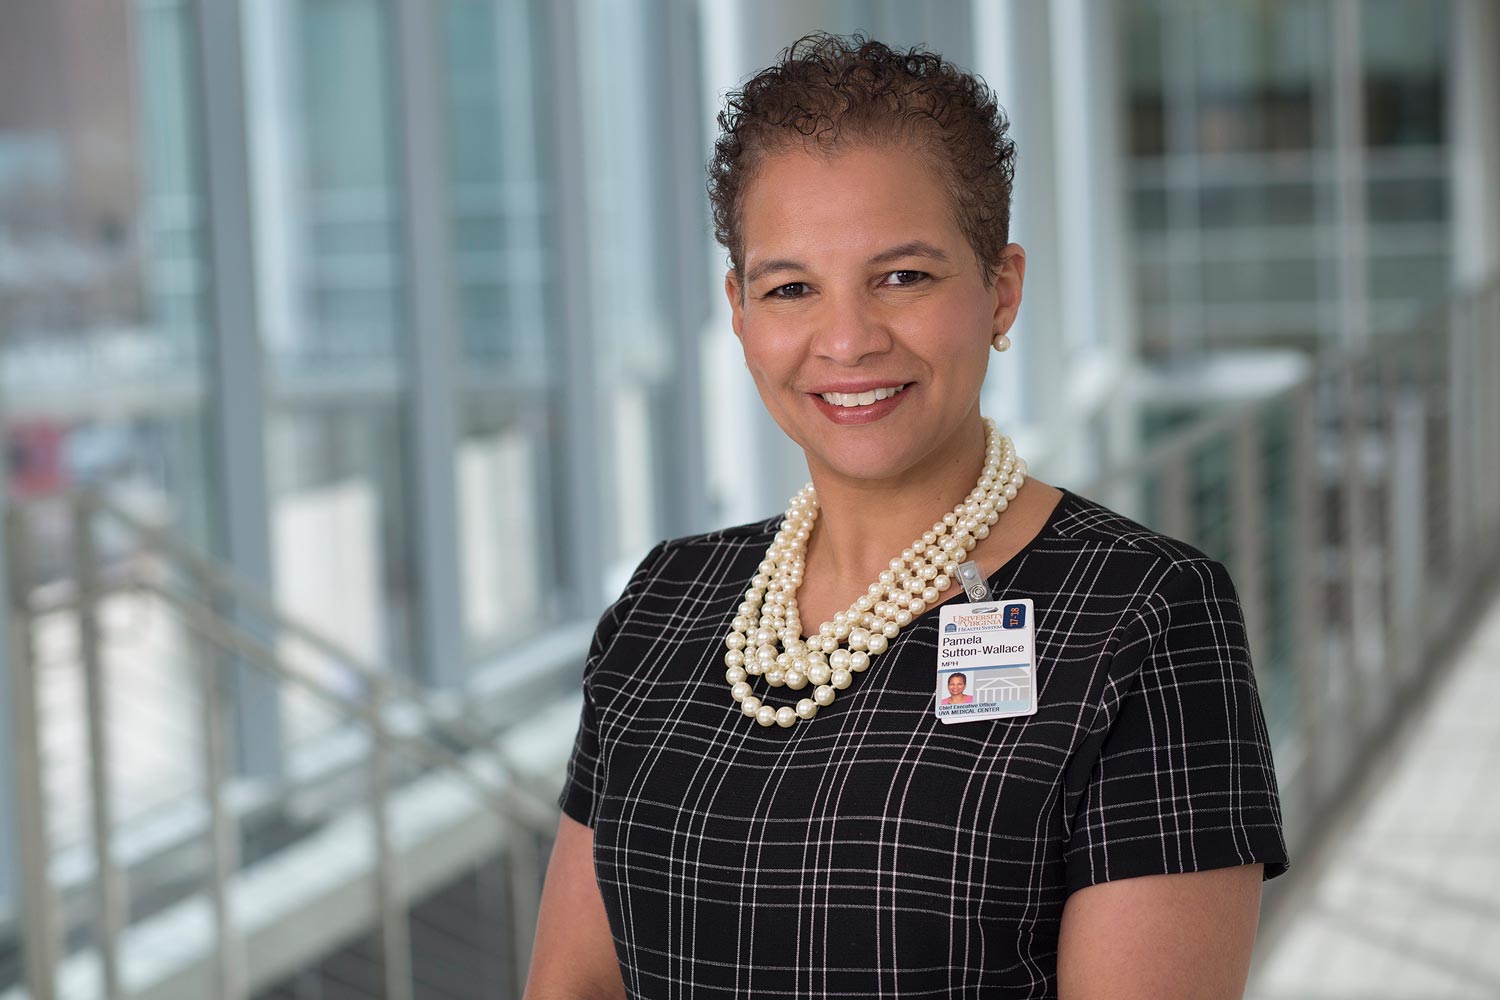 Modern Healthcare Names Med Center CEO One of Nation’s Top 25 Women Leaders